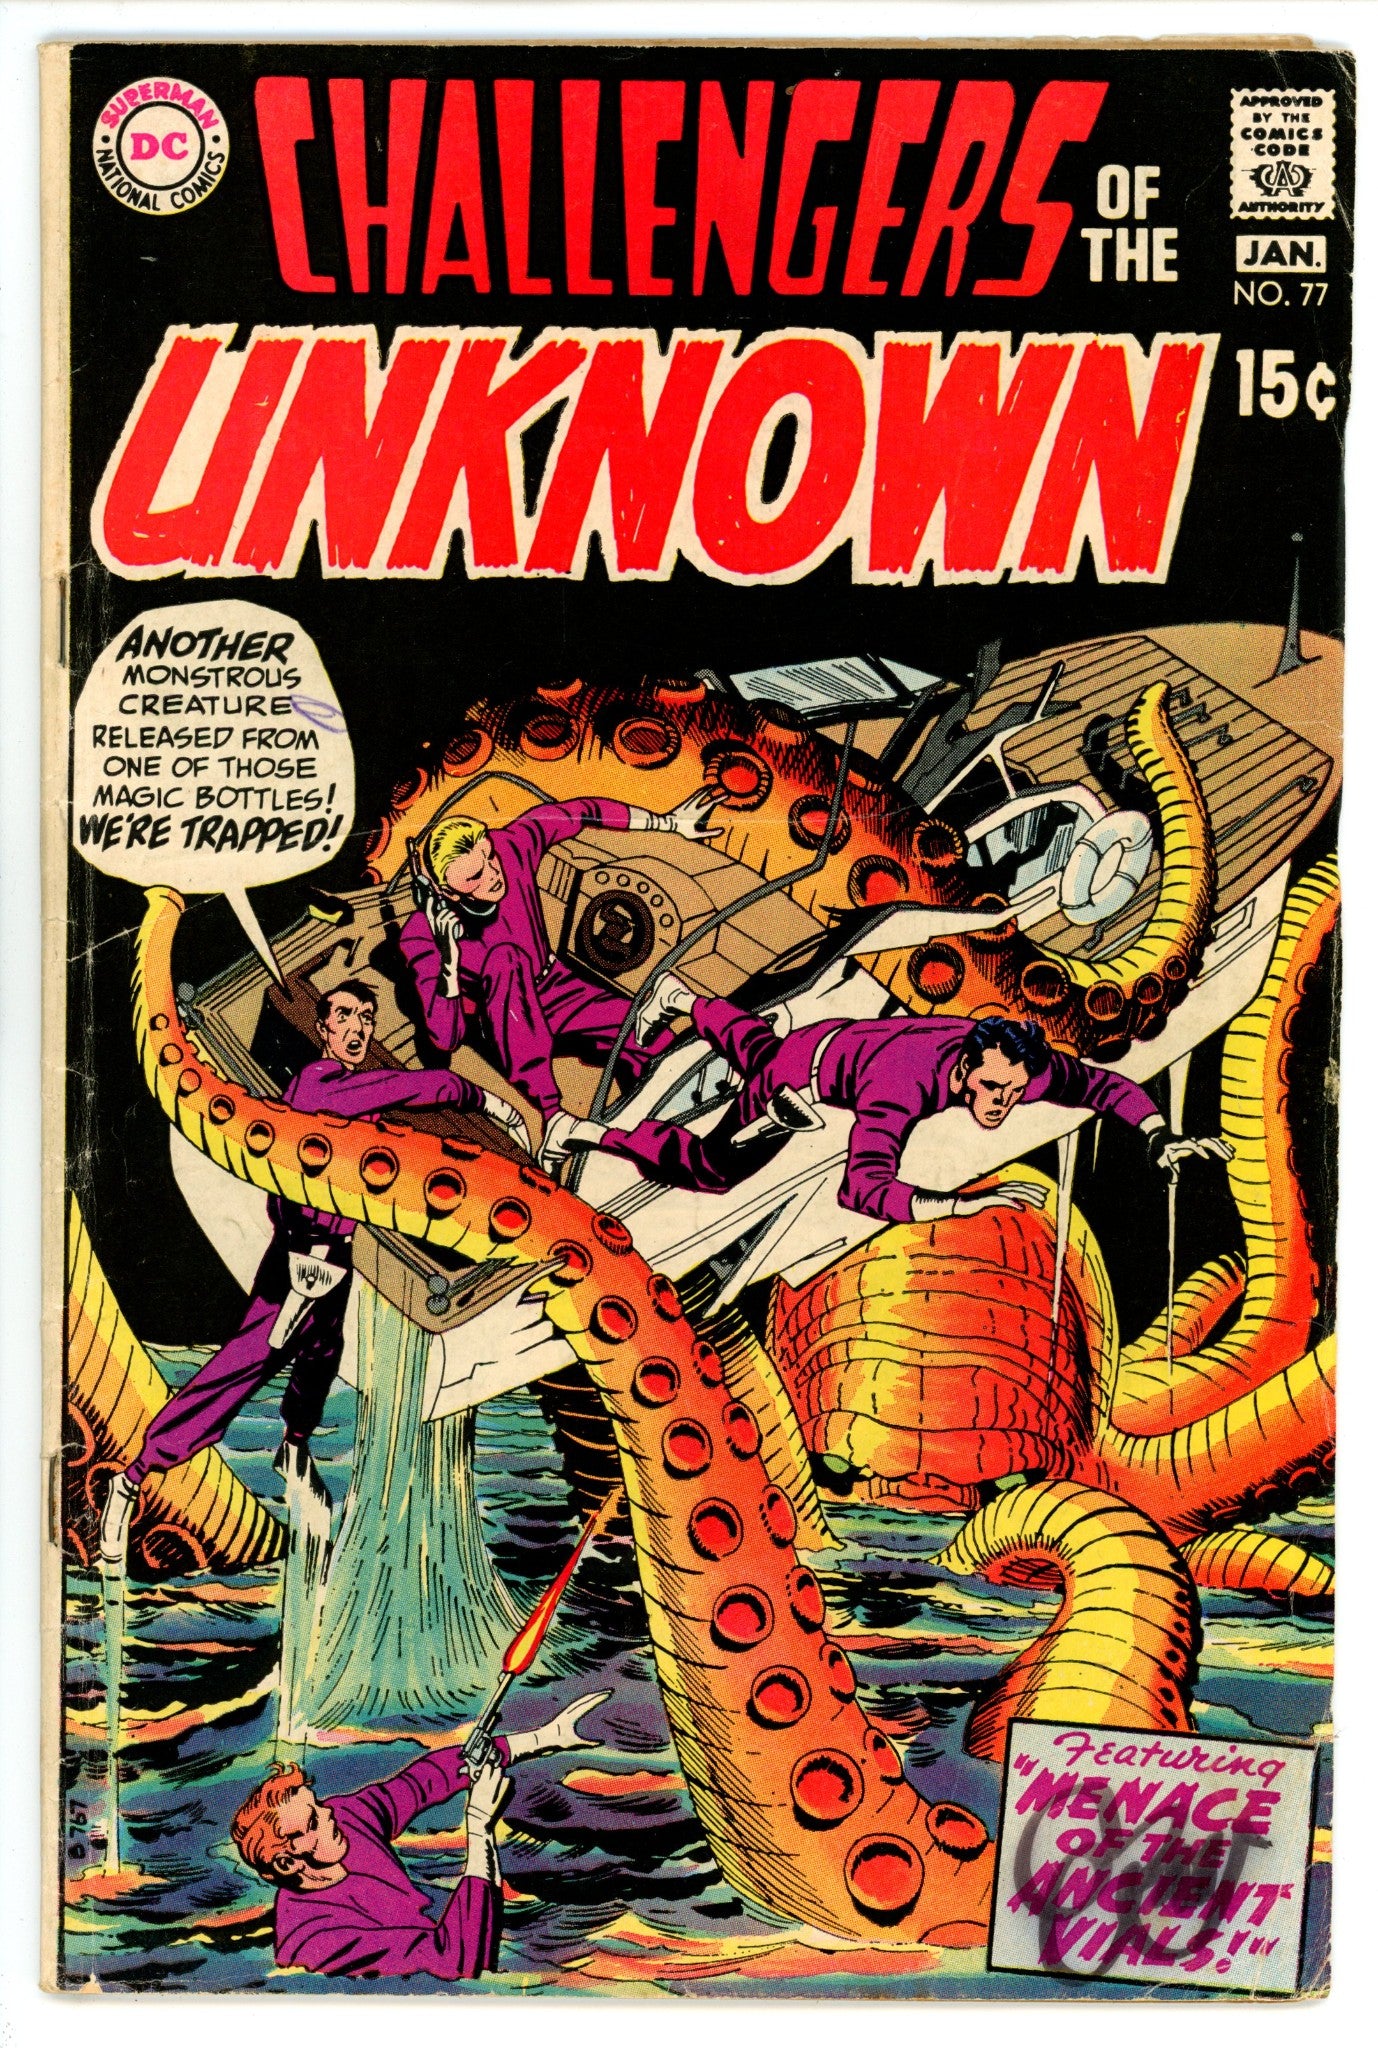 Challengers of the Unknown Vol 1 77 VG (4.0) (1970) 